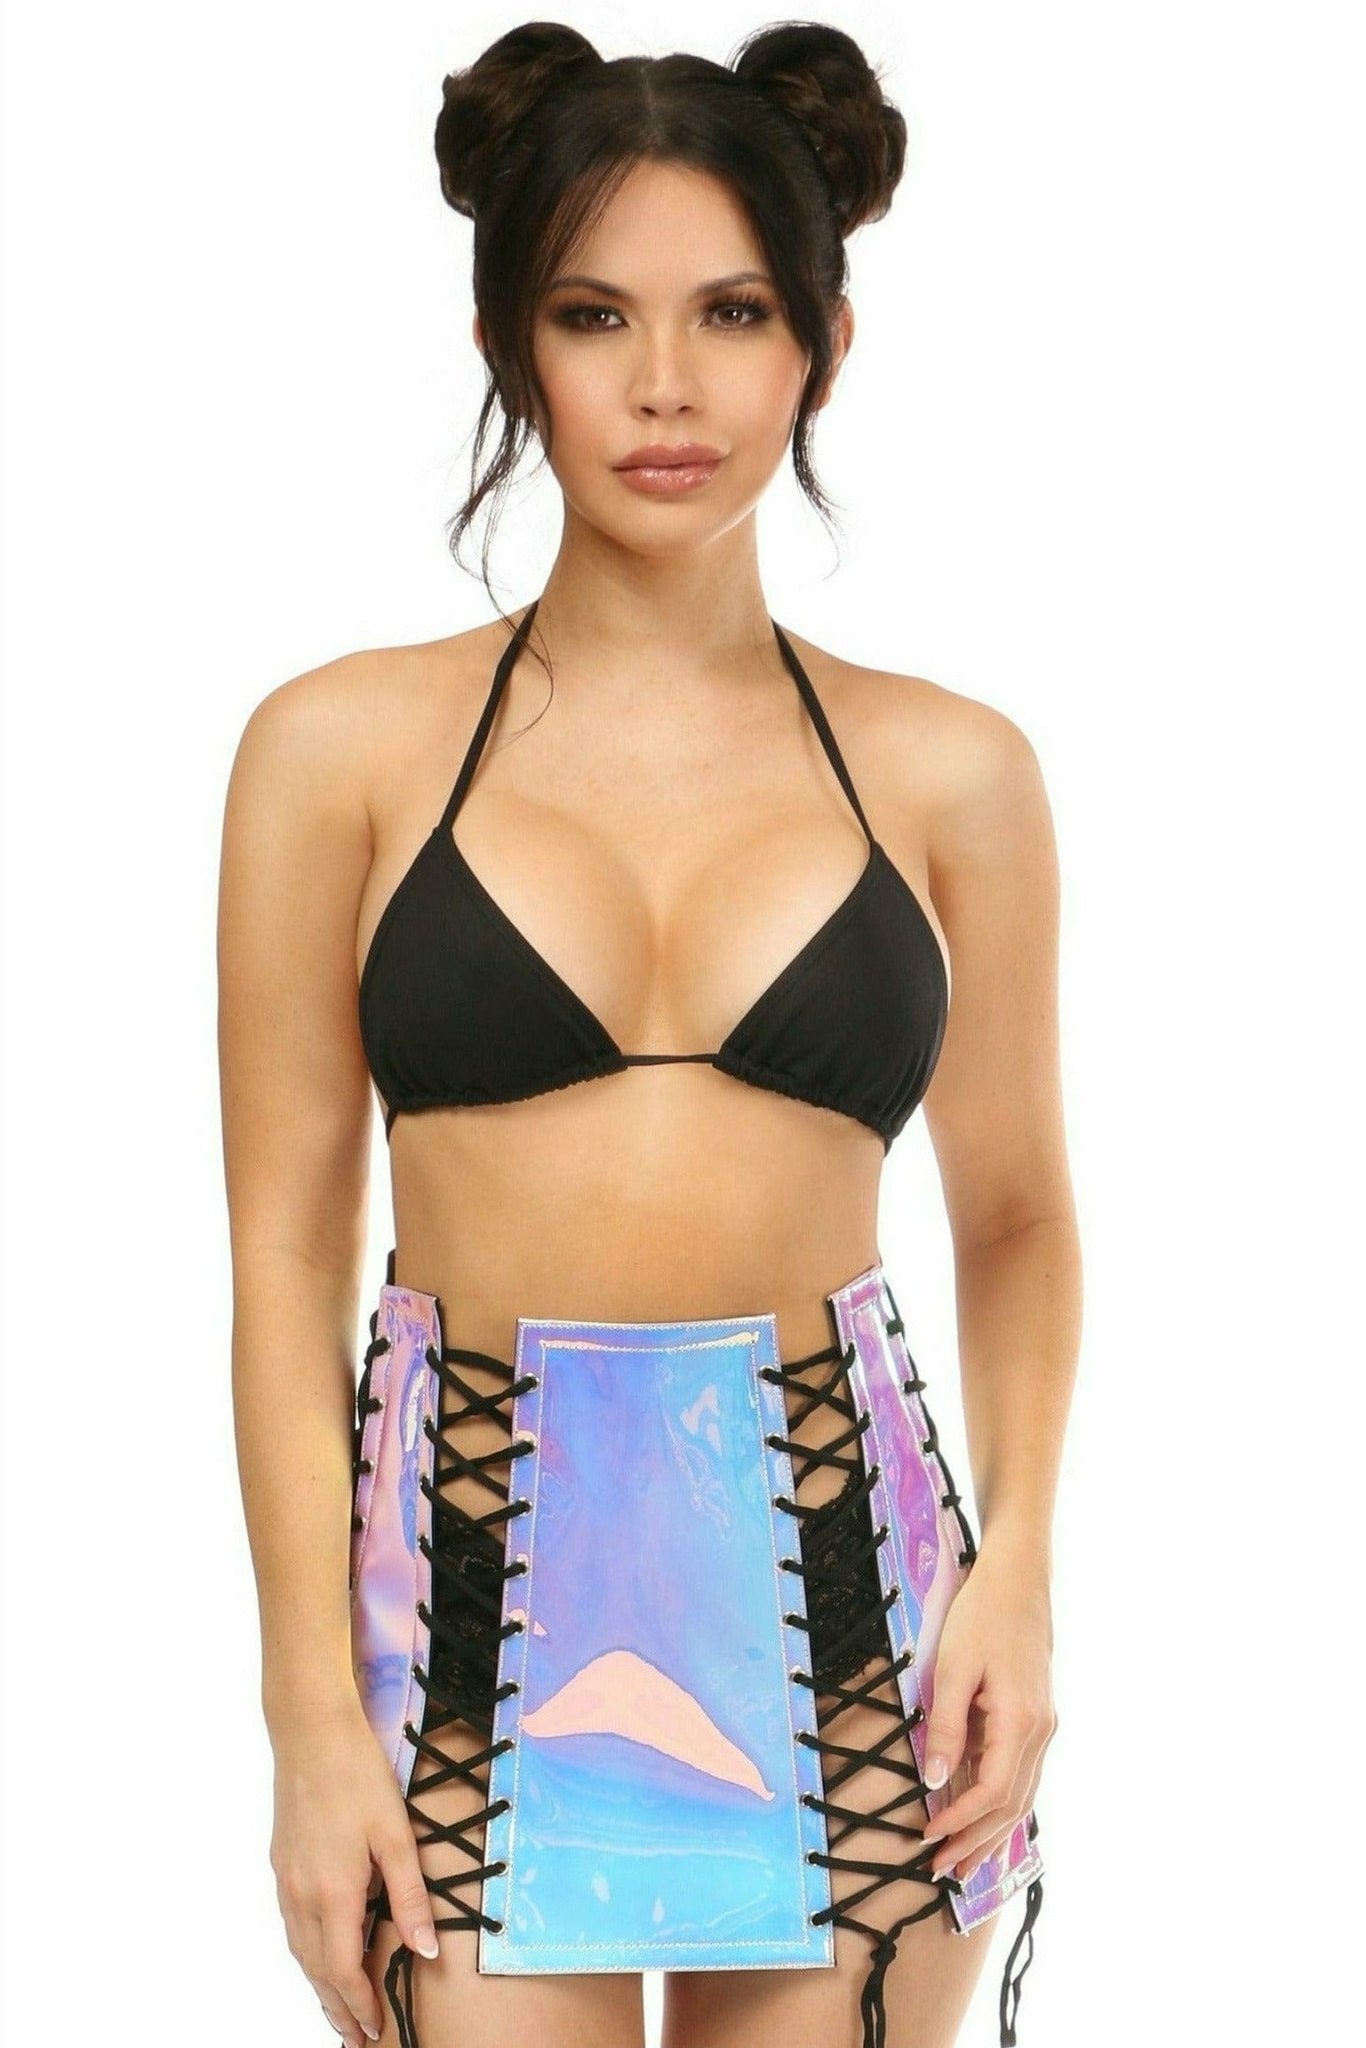 Blue with Purple Hologram Lace-Up Skirt Musotica.com